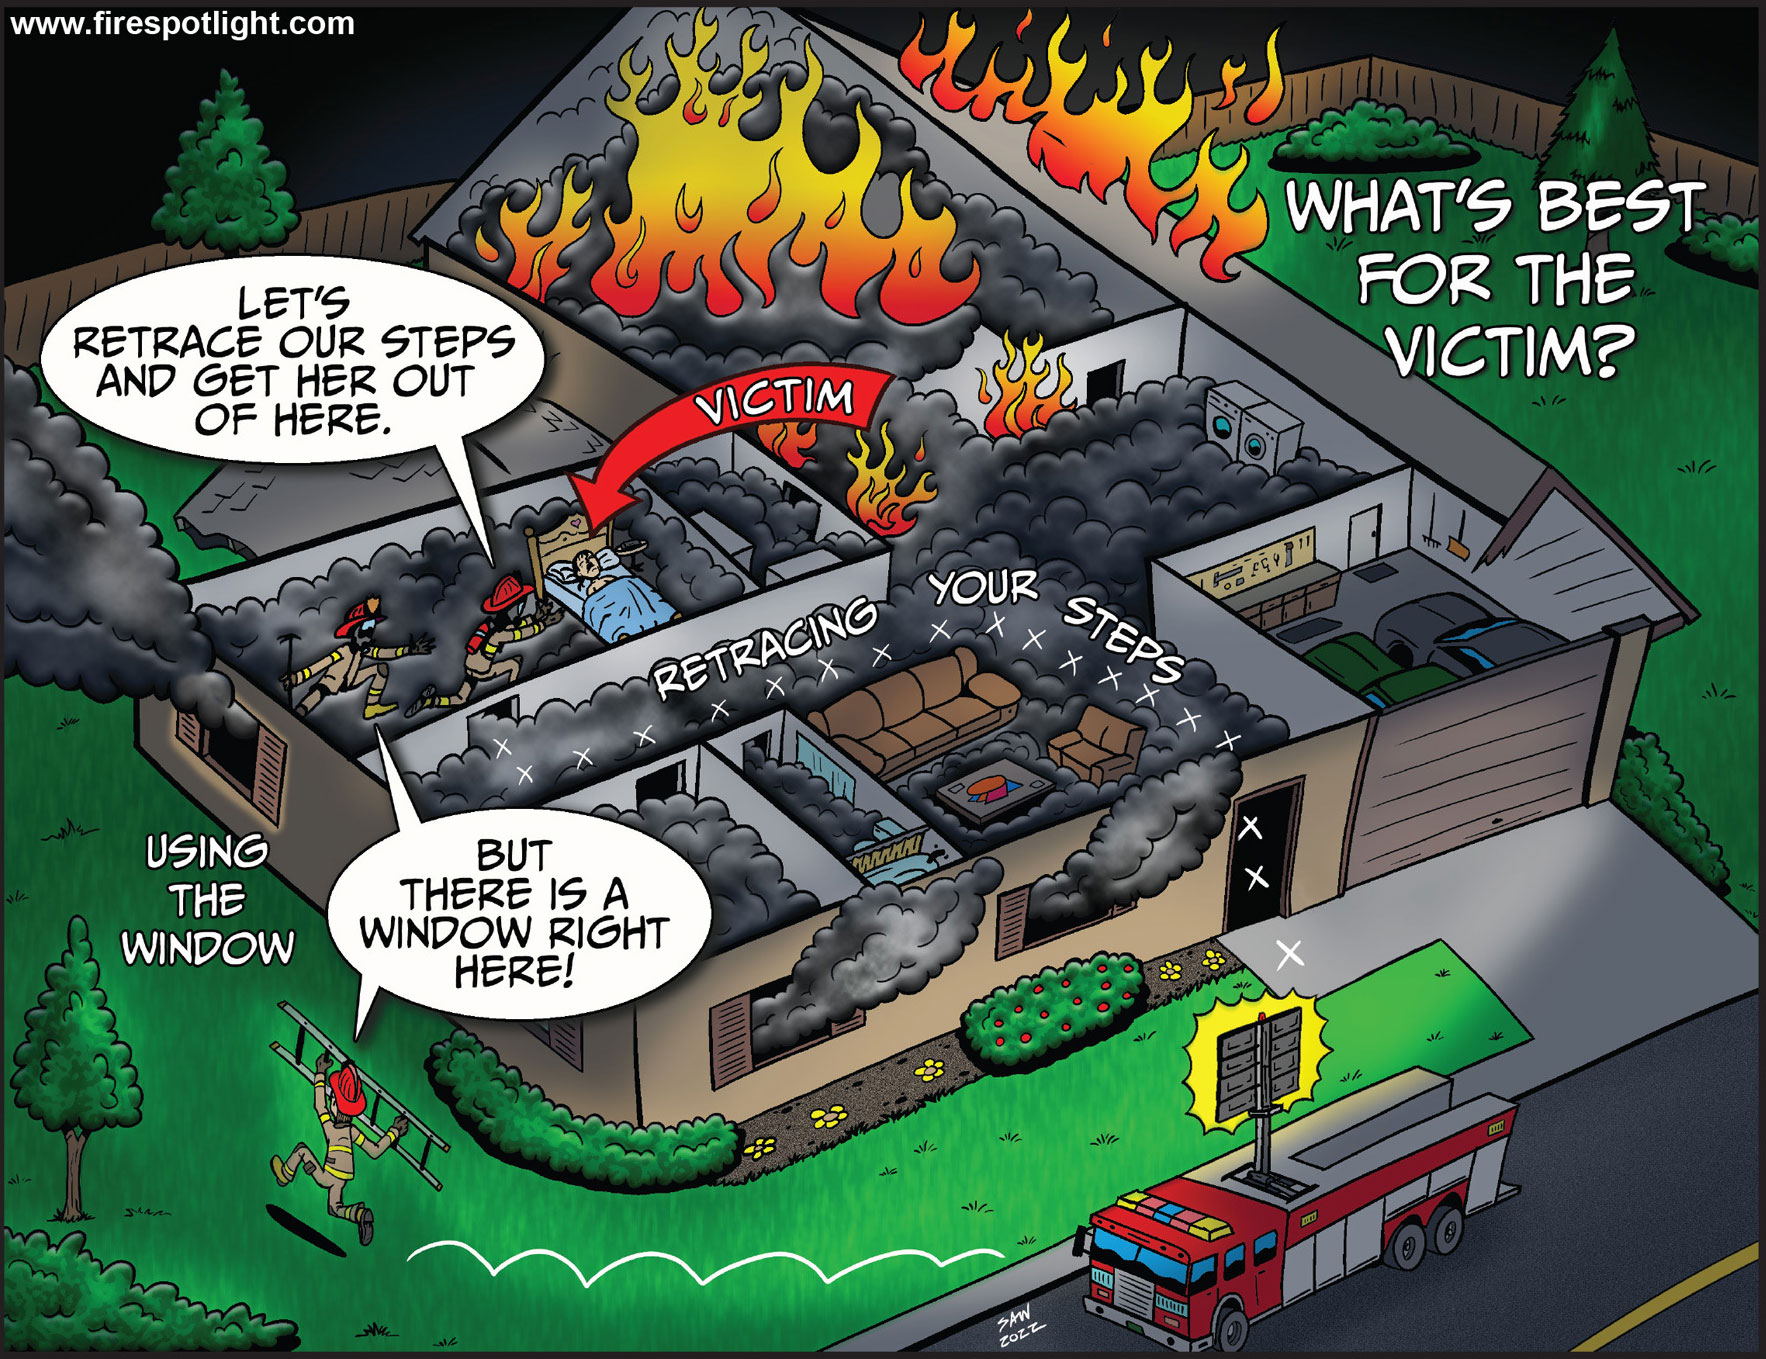 Featured image for “Structure Fire Rescue Plan”